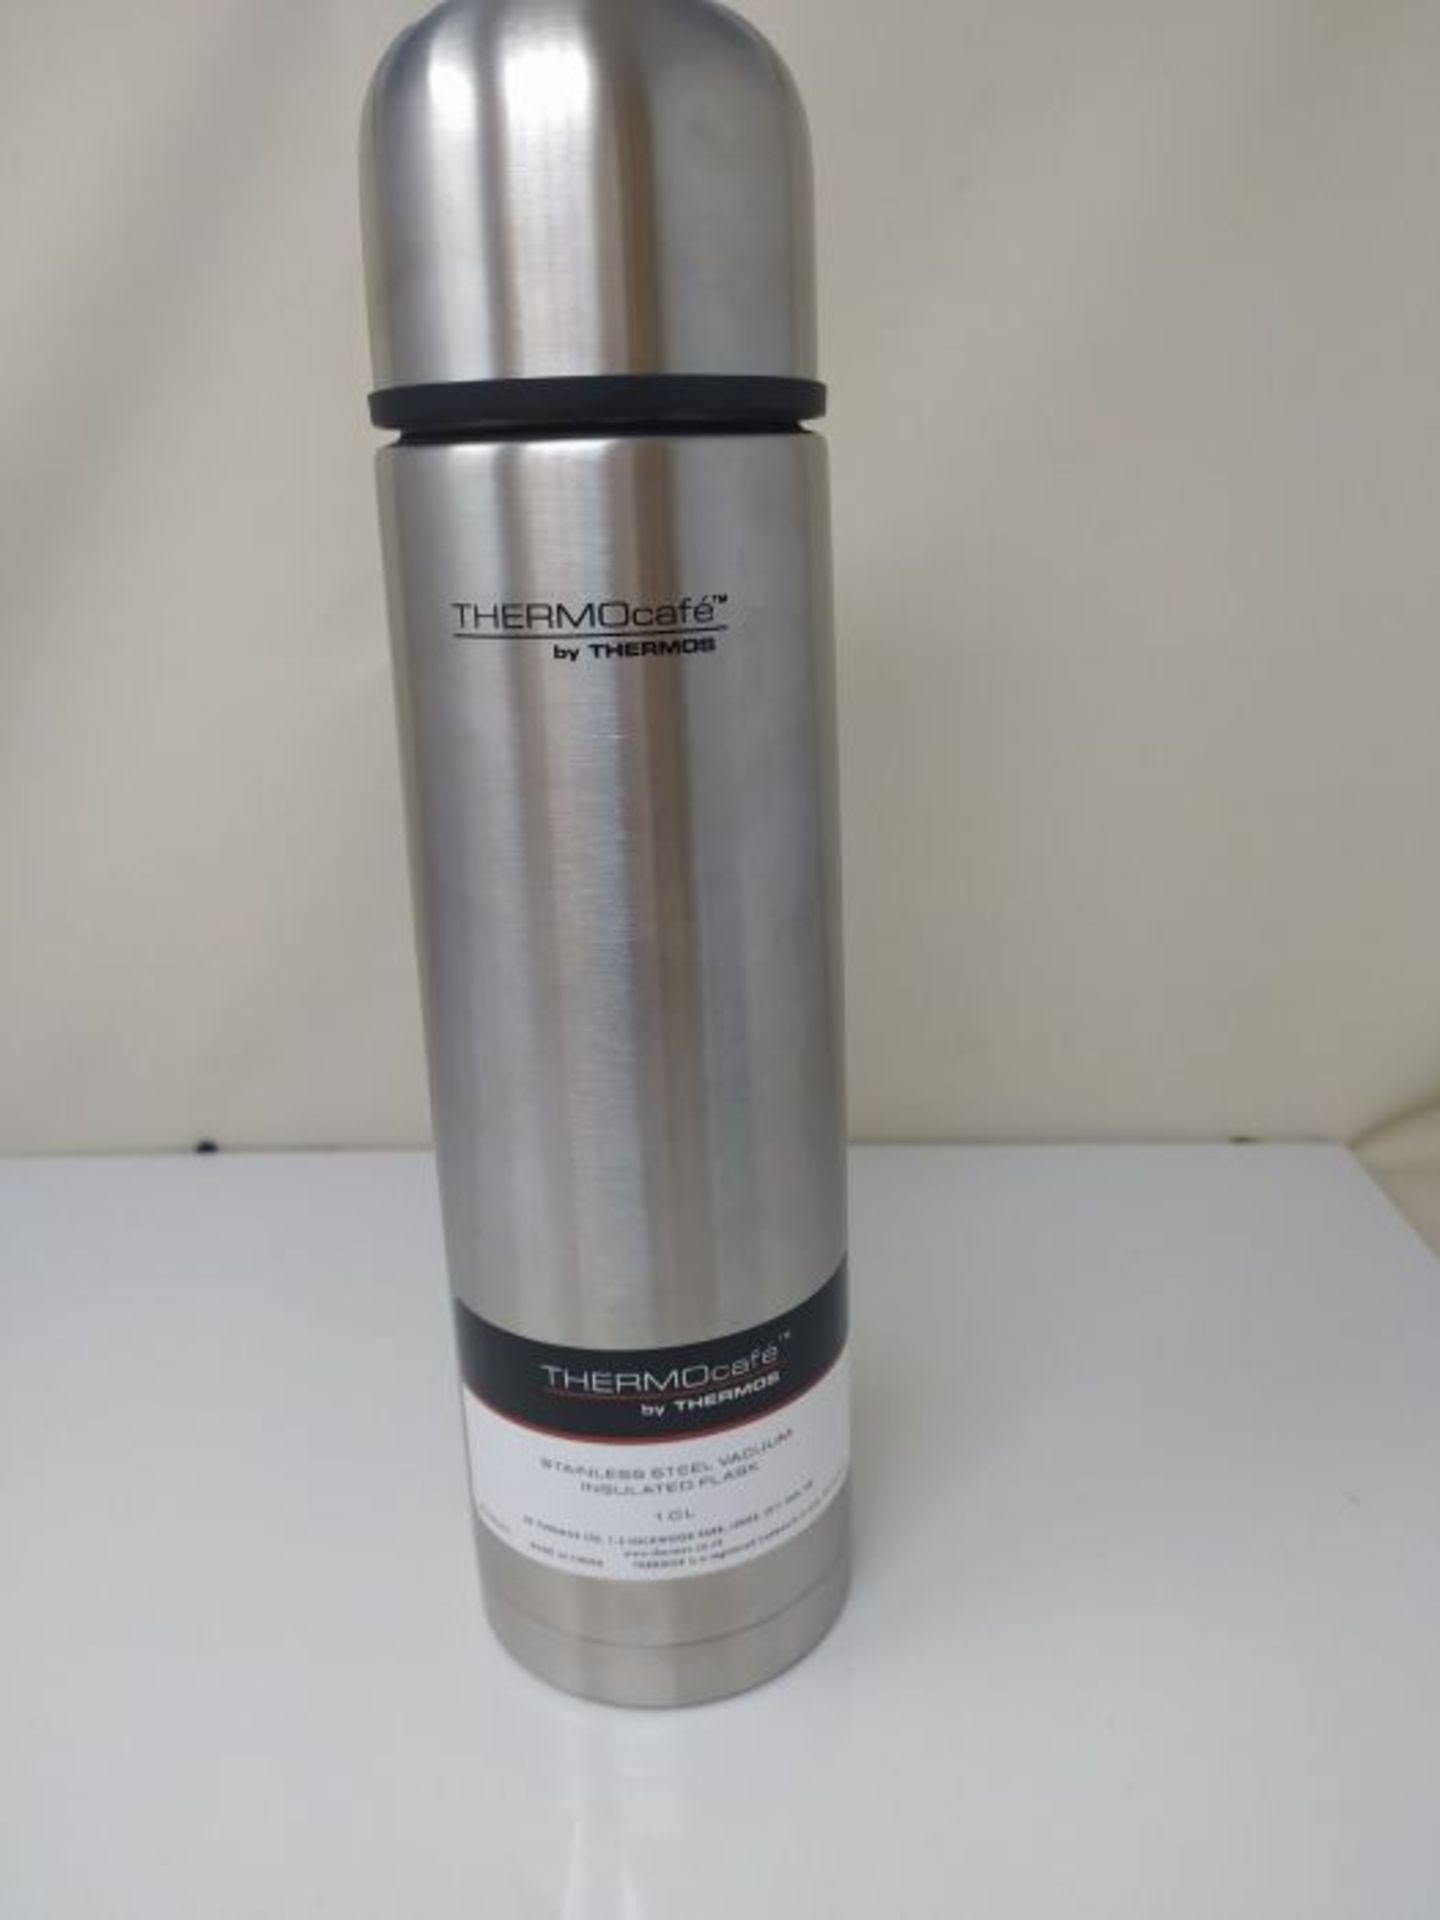 ThermoCafé Stainless Steel Flask, 1.0 L - Image 2 of 2